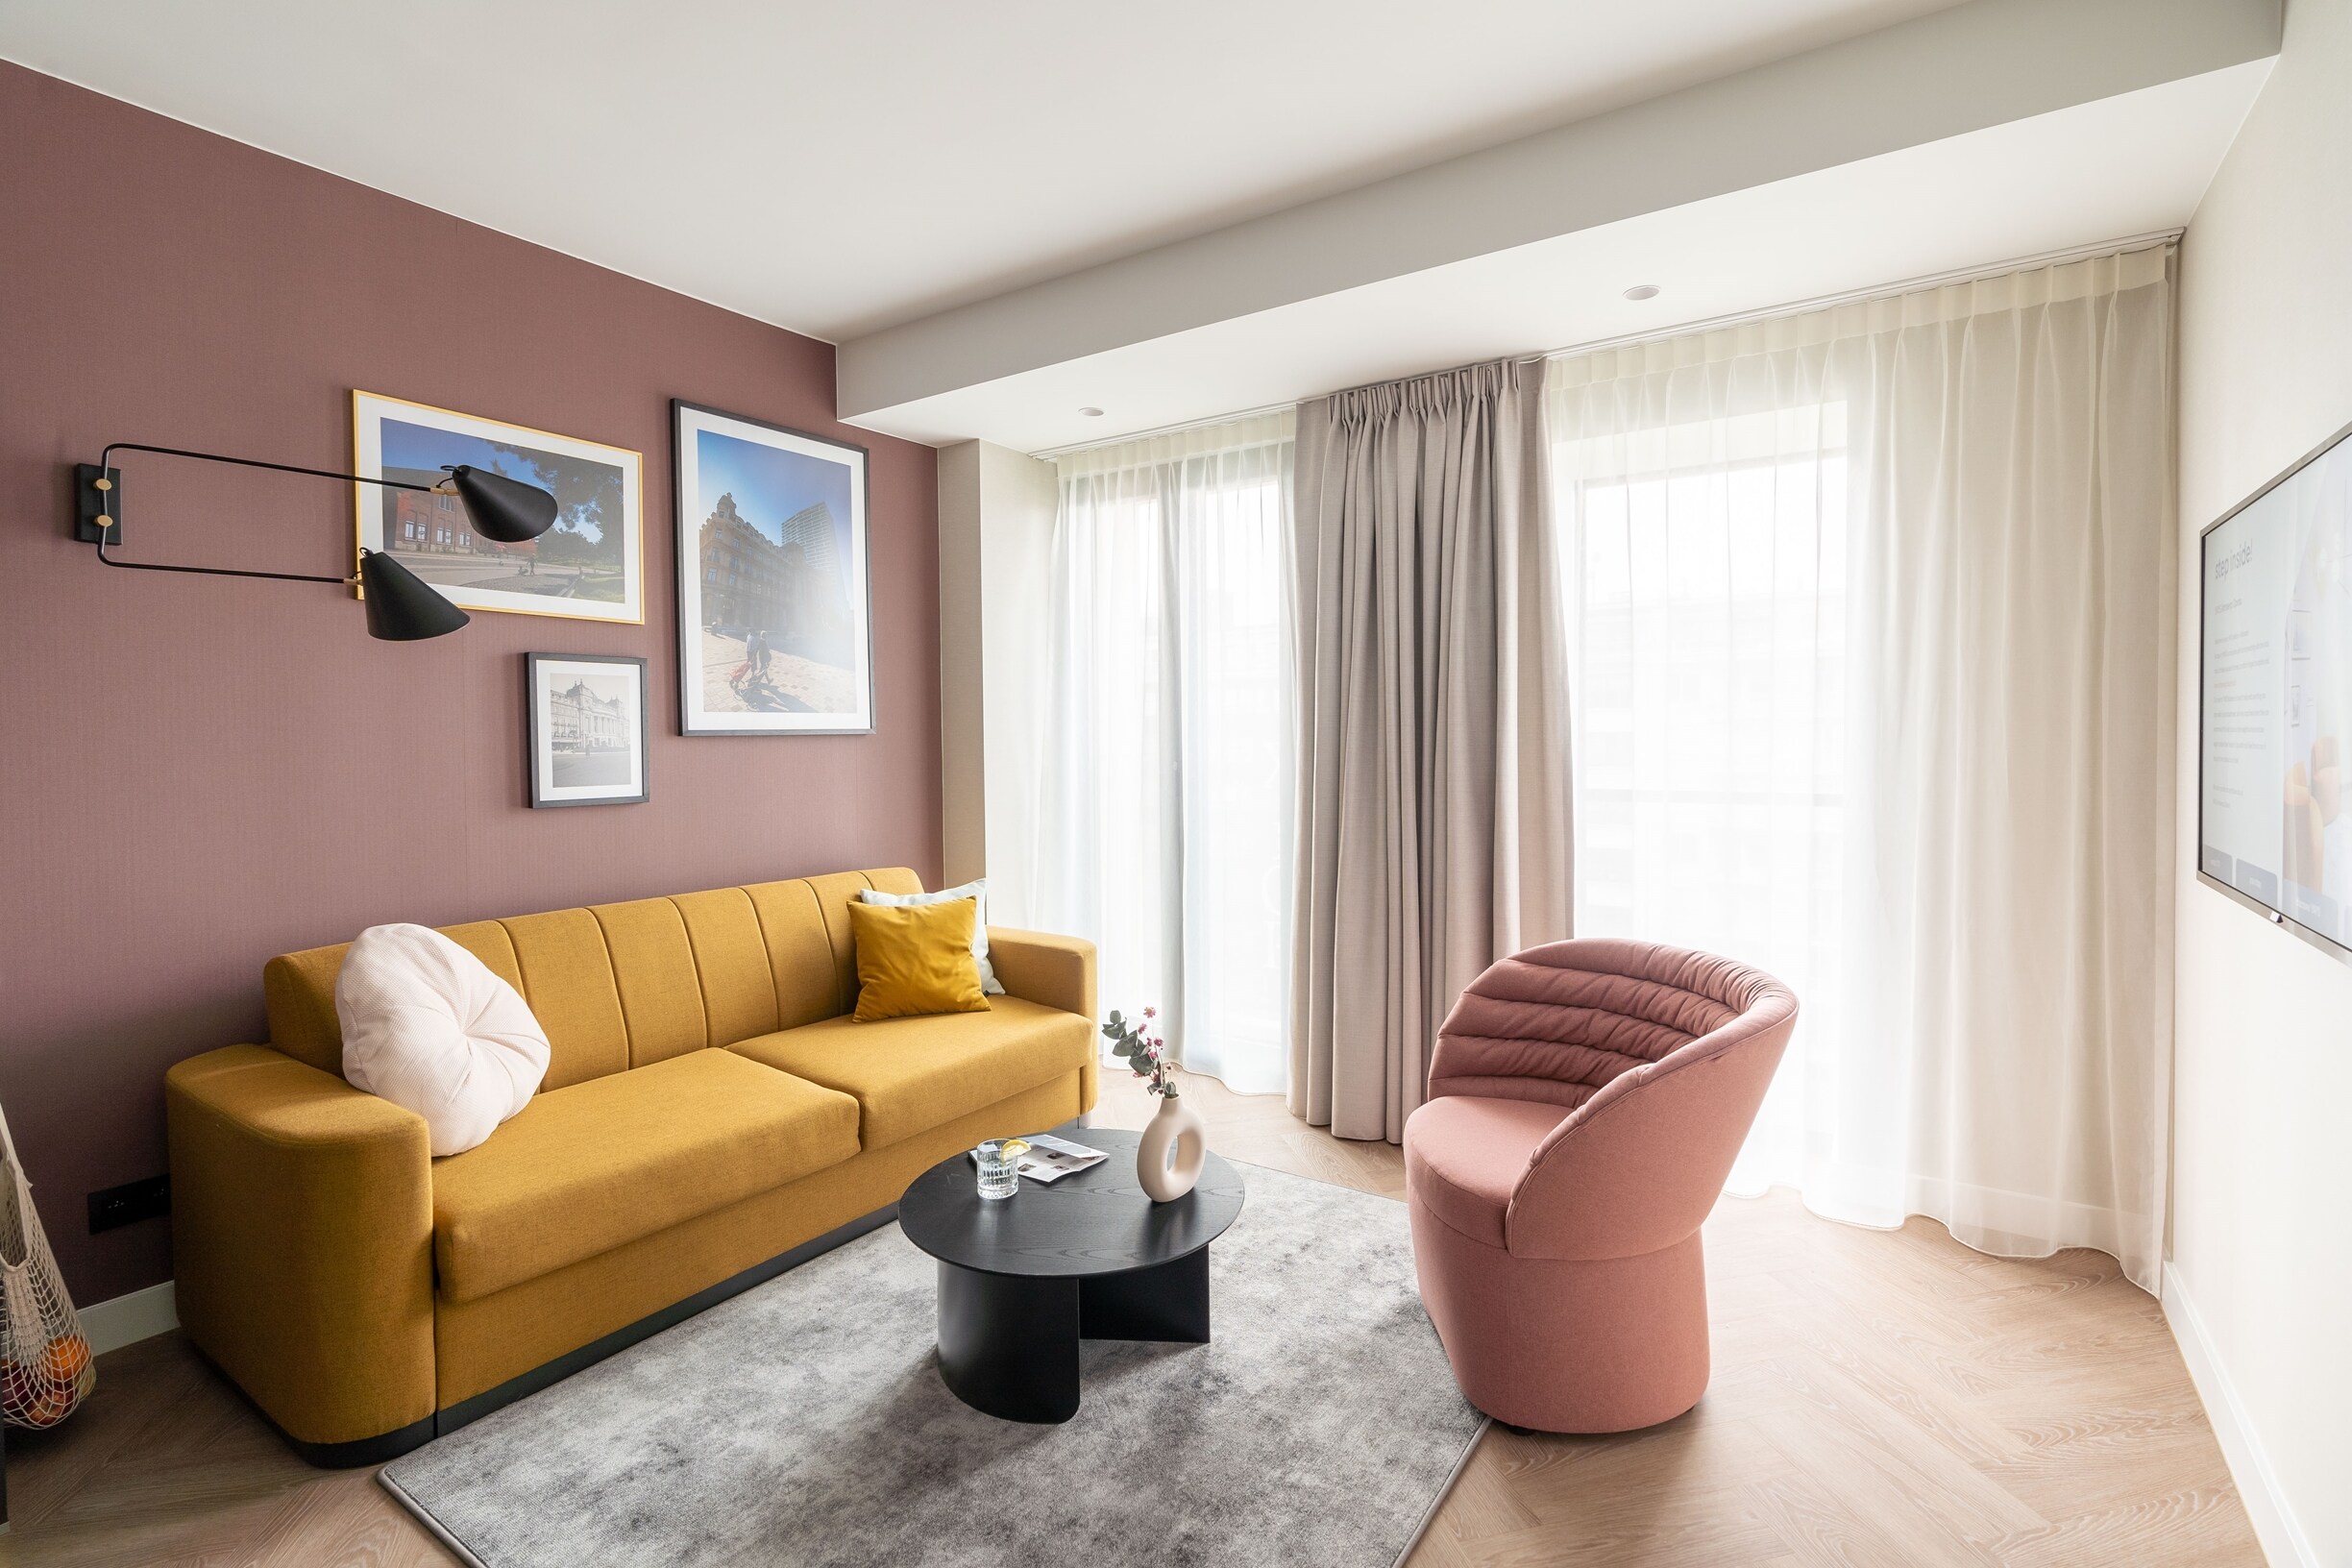 Property Image 2 - Breathtaking and modern apartment in the heart of Antwerp perfect for 4 persons 